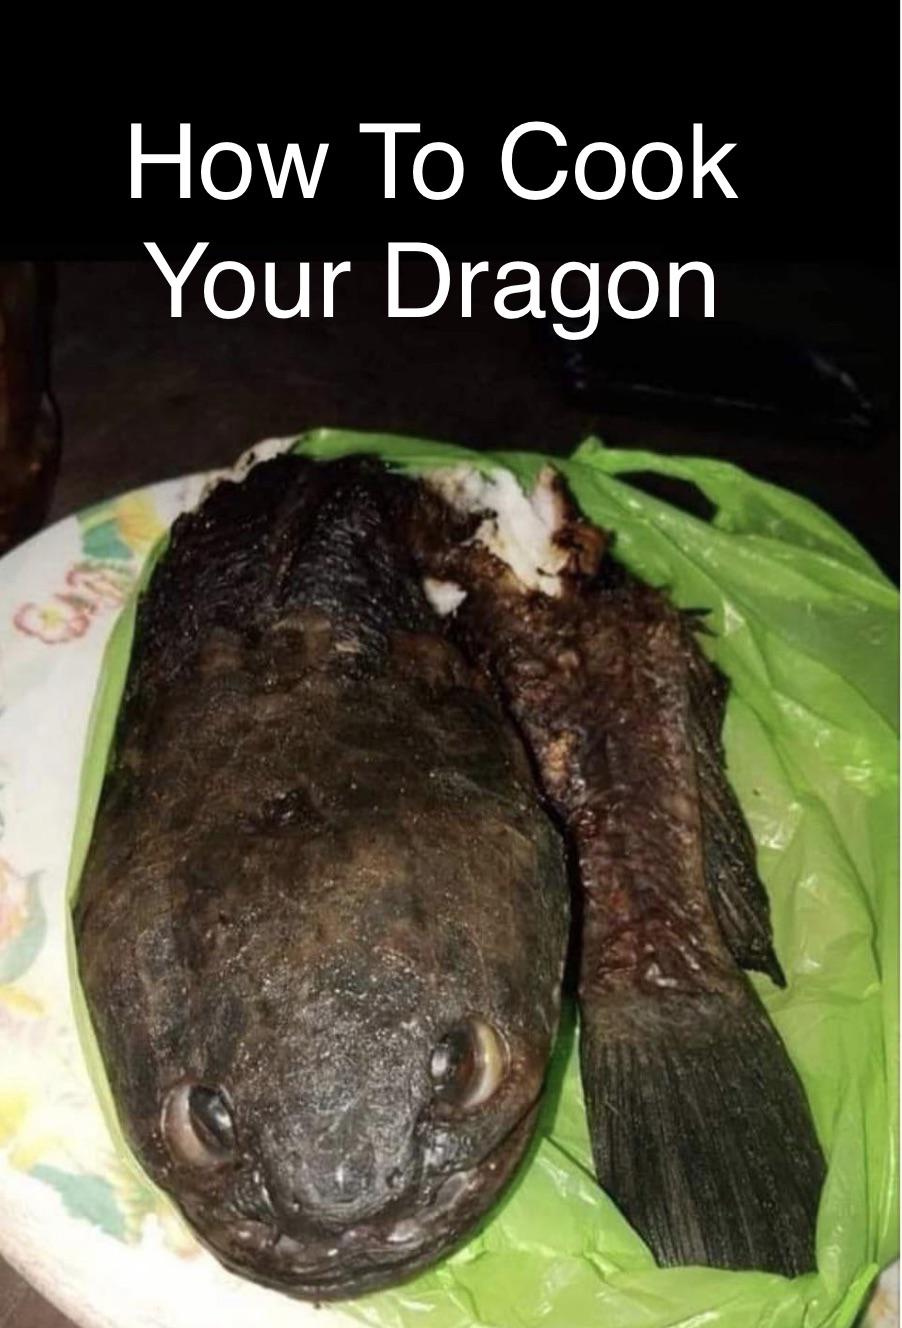 funny memes - social network movie poster - How To Cook Your Dragon